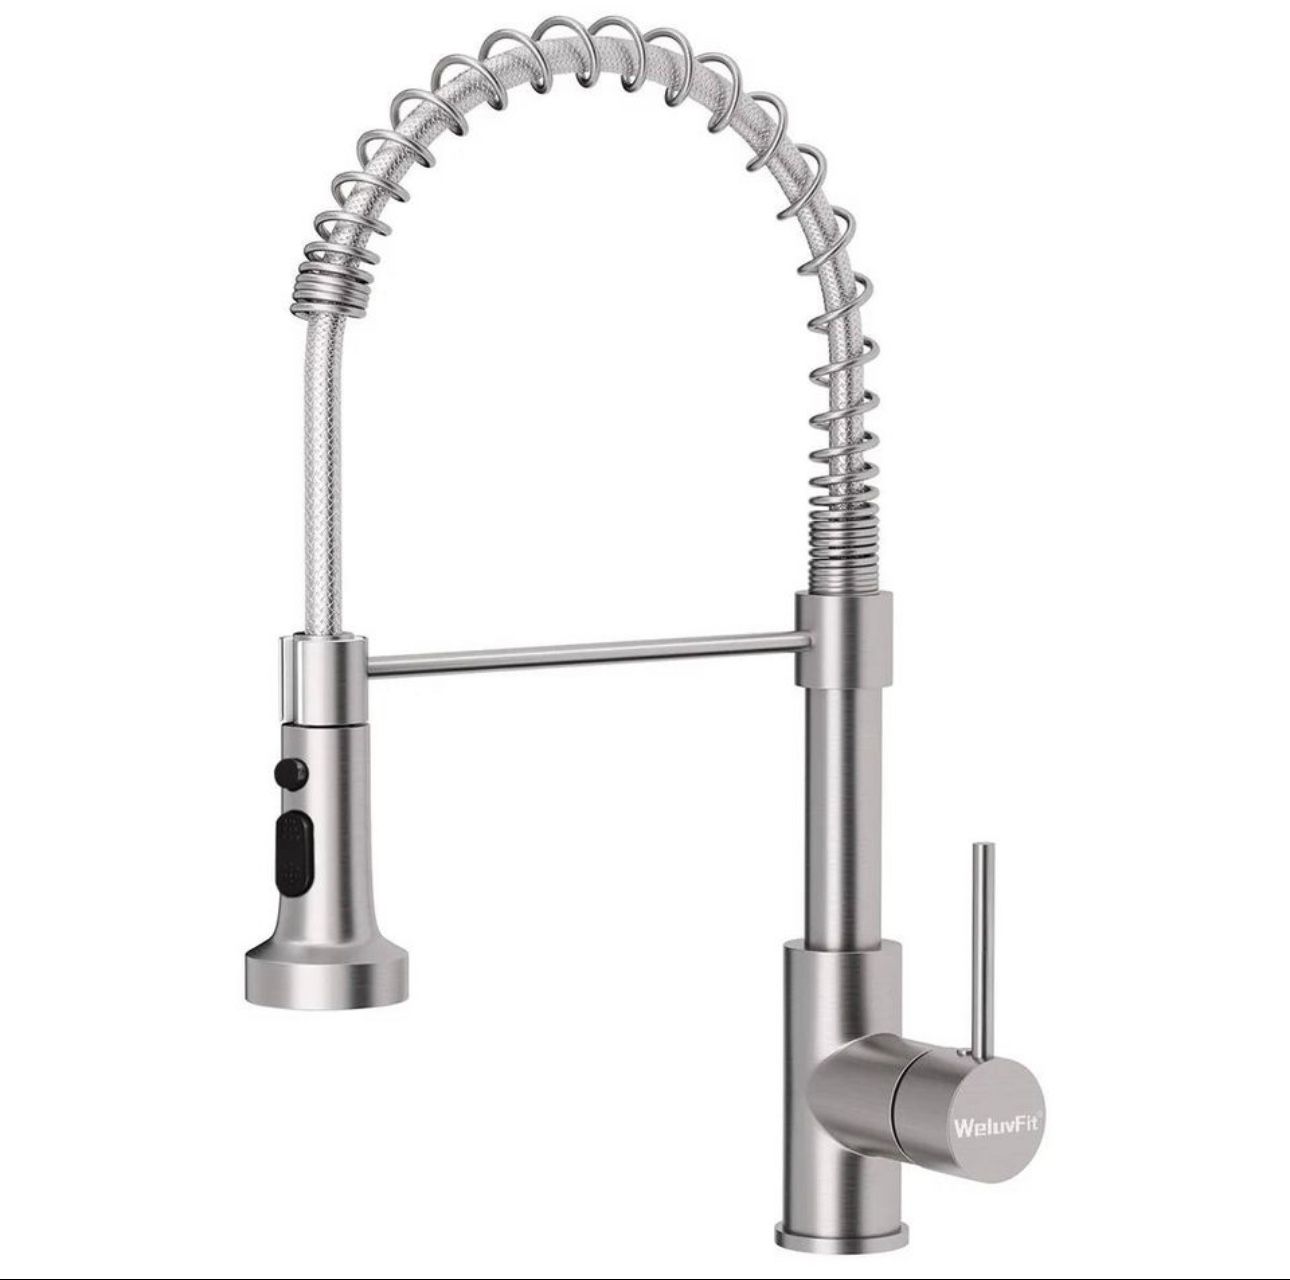 BRAND NEW Kitchen Faucet with Pull Down Sprayer, Dual Function Sprayhead in Stainless Steel Finish